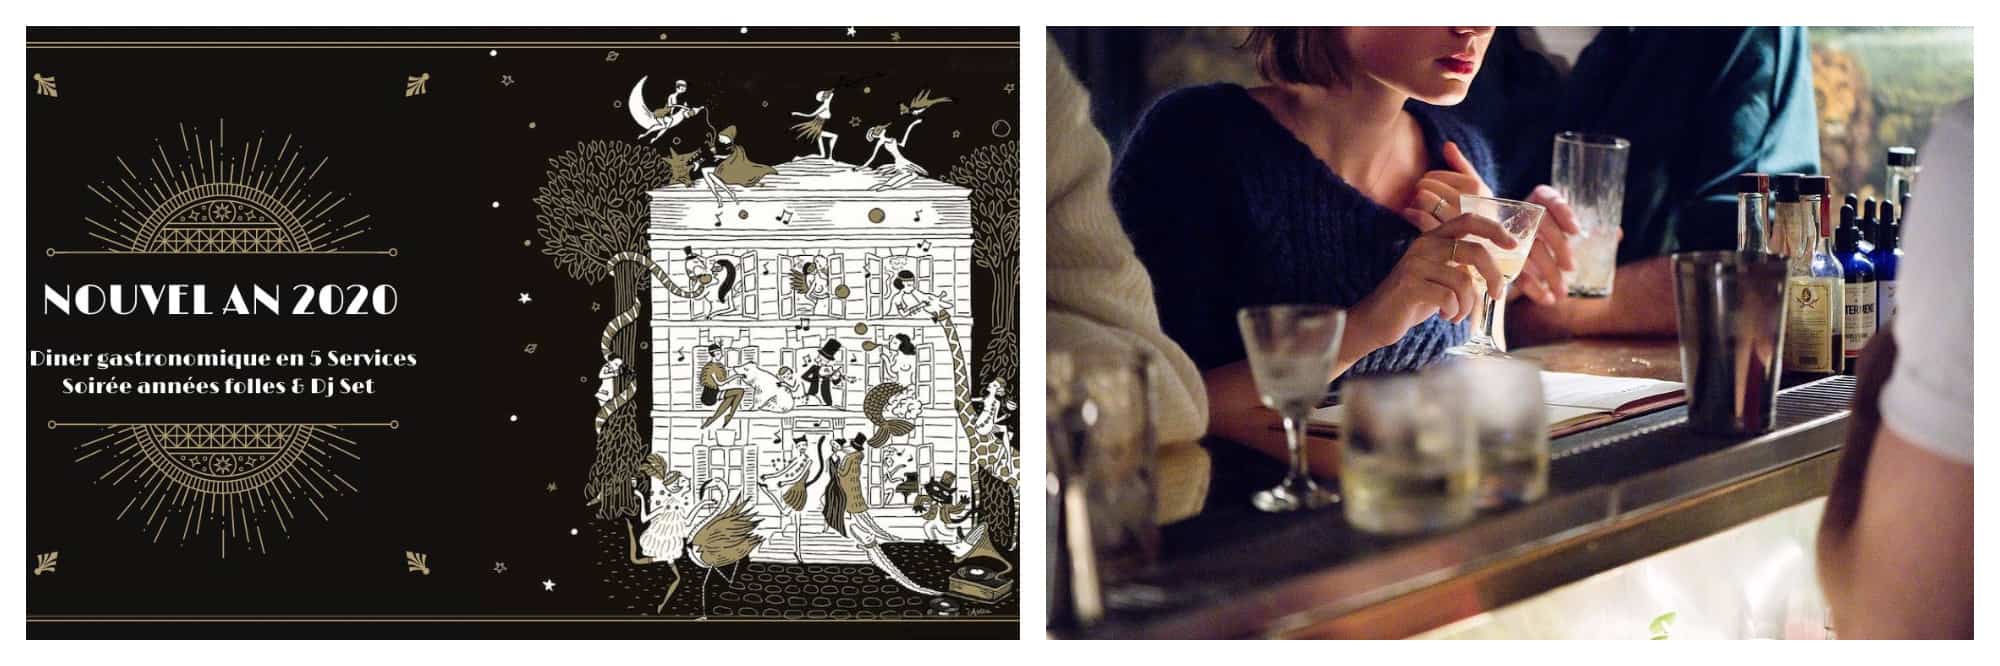 A promotional poster for the Nouvel An 2020 event at Hotel Particulier (left). A woman ordering a drink at a bar (right).